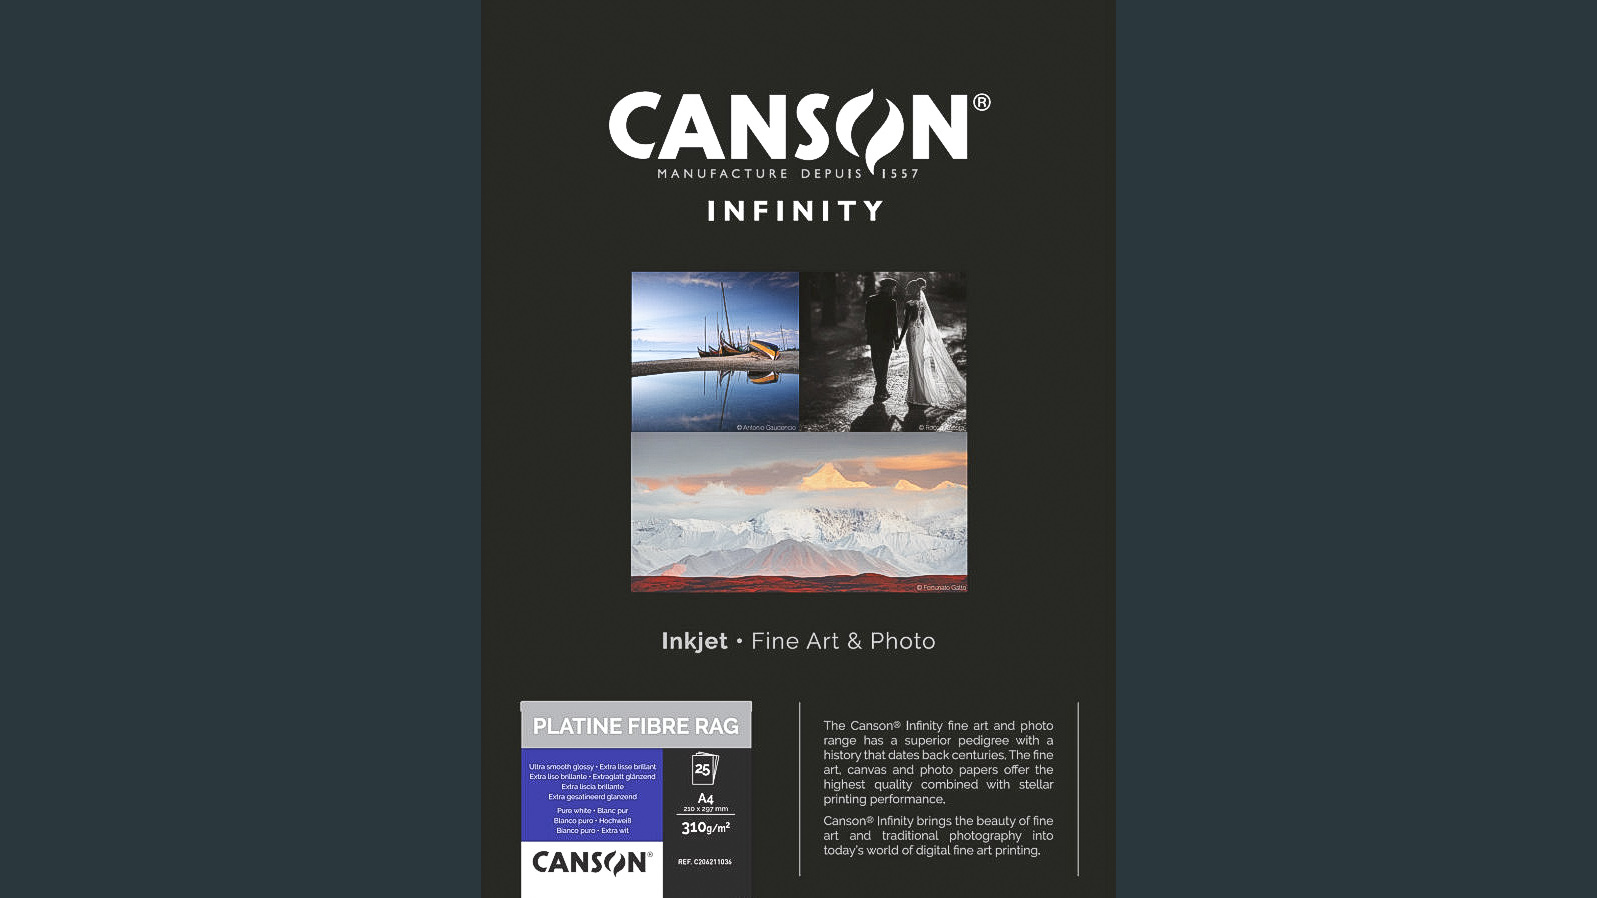 Canson Infinity Platine Fibre Rag 310gsm, one of the best photo papers